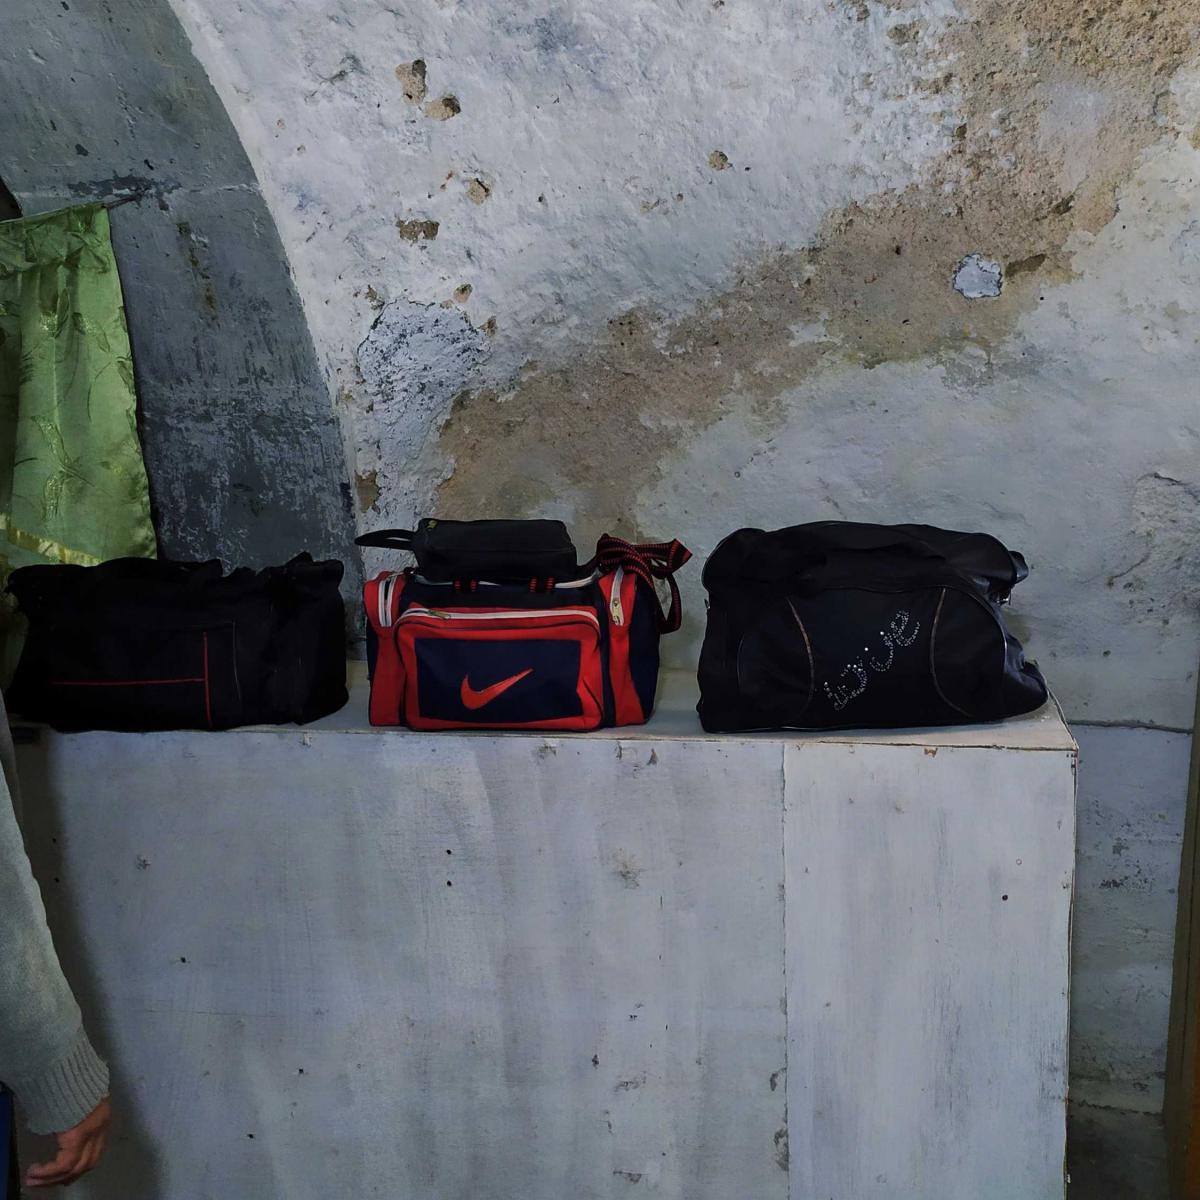 Ahmed stands next to bags he repaired. He dreams of one day having his own shop and tools to develop his own brand of bags, "made in Mosul".